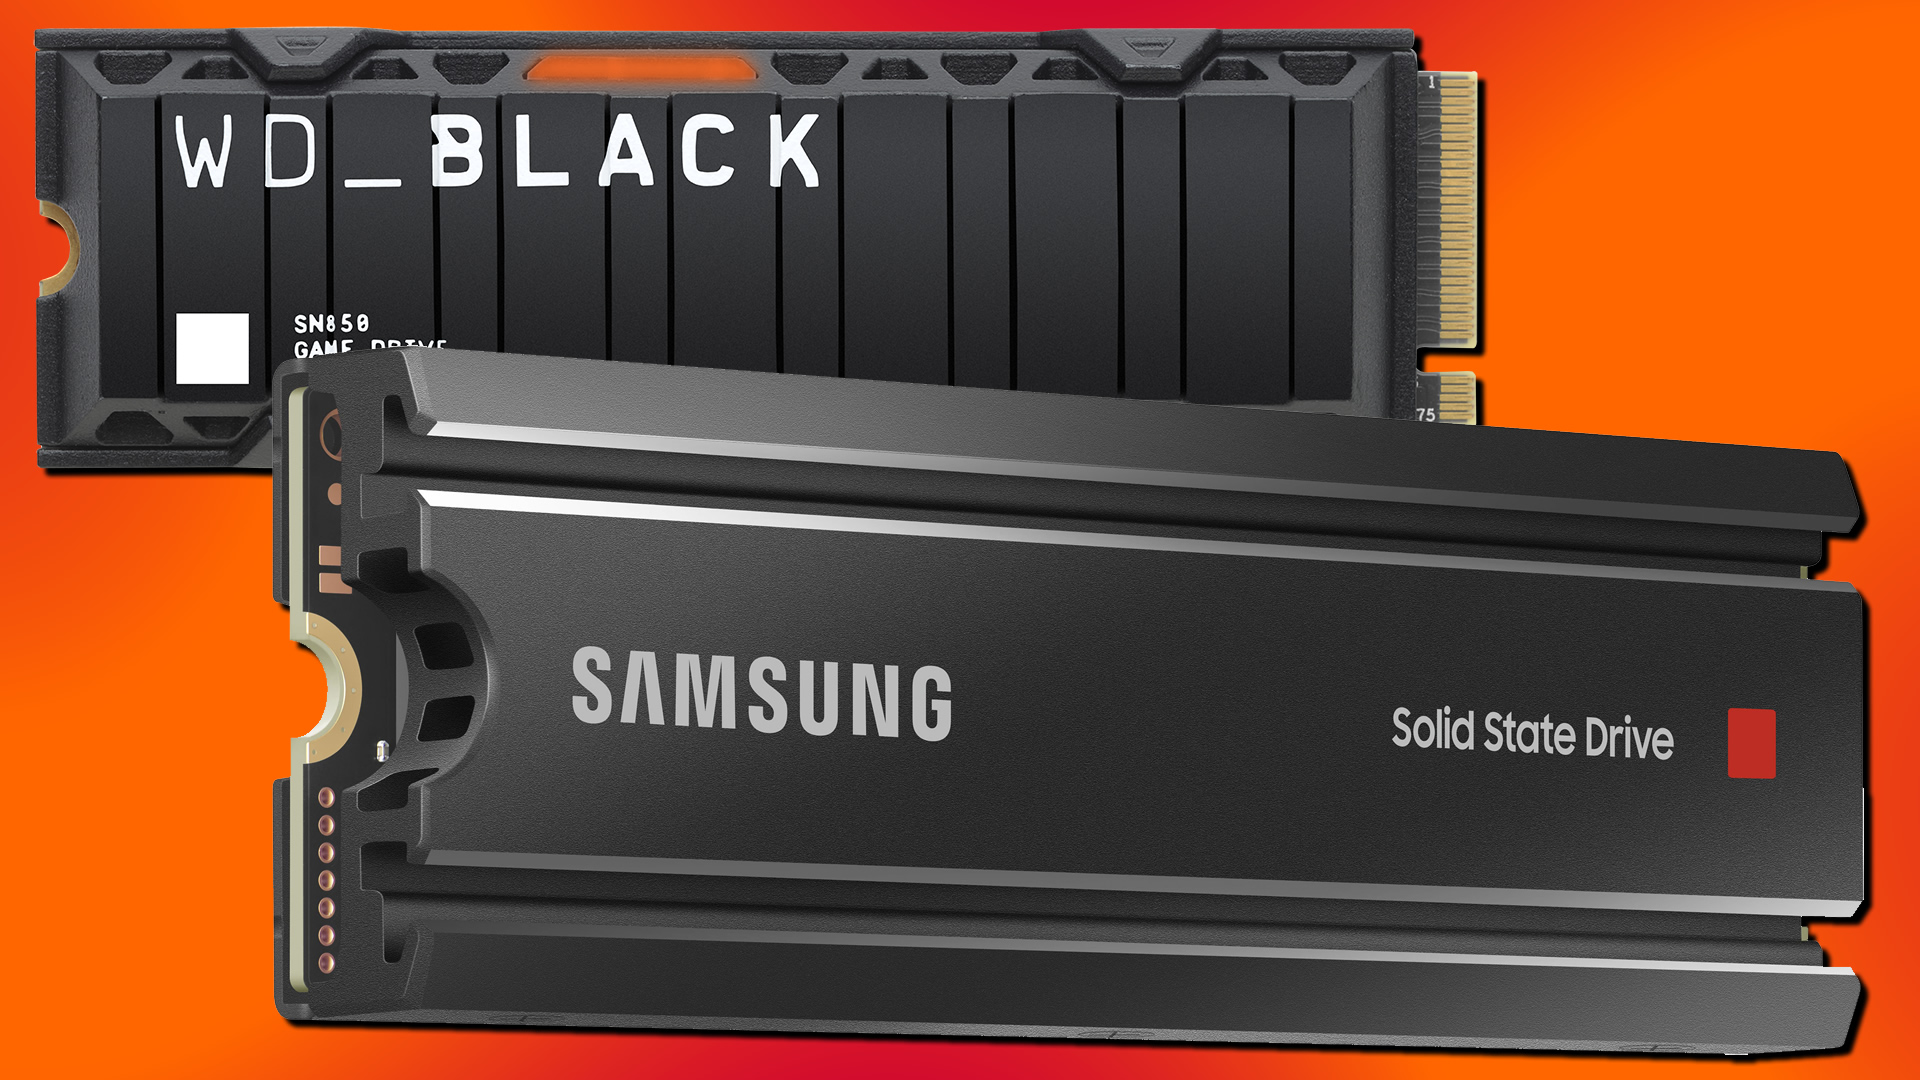 Samsung 980 Pro vs WD Black SN850: Which top PS5 SSD is right for you?